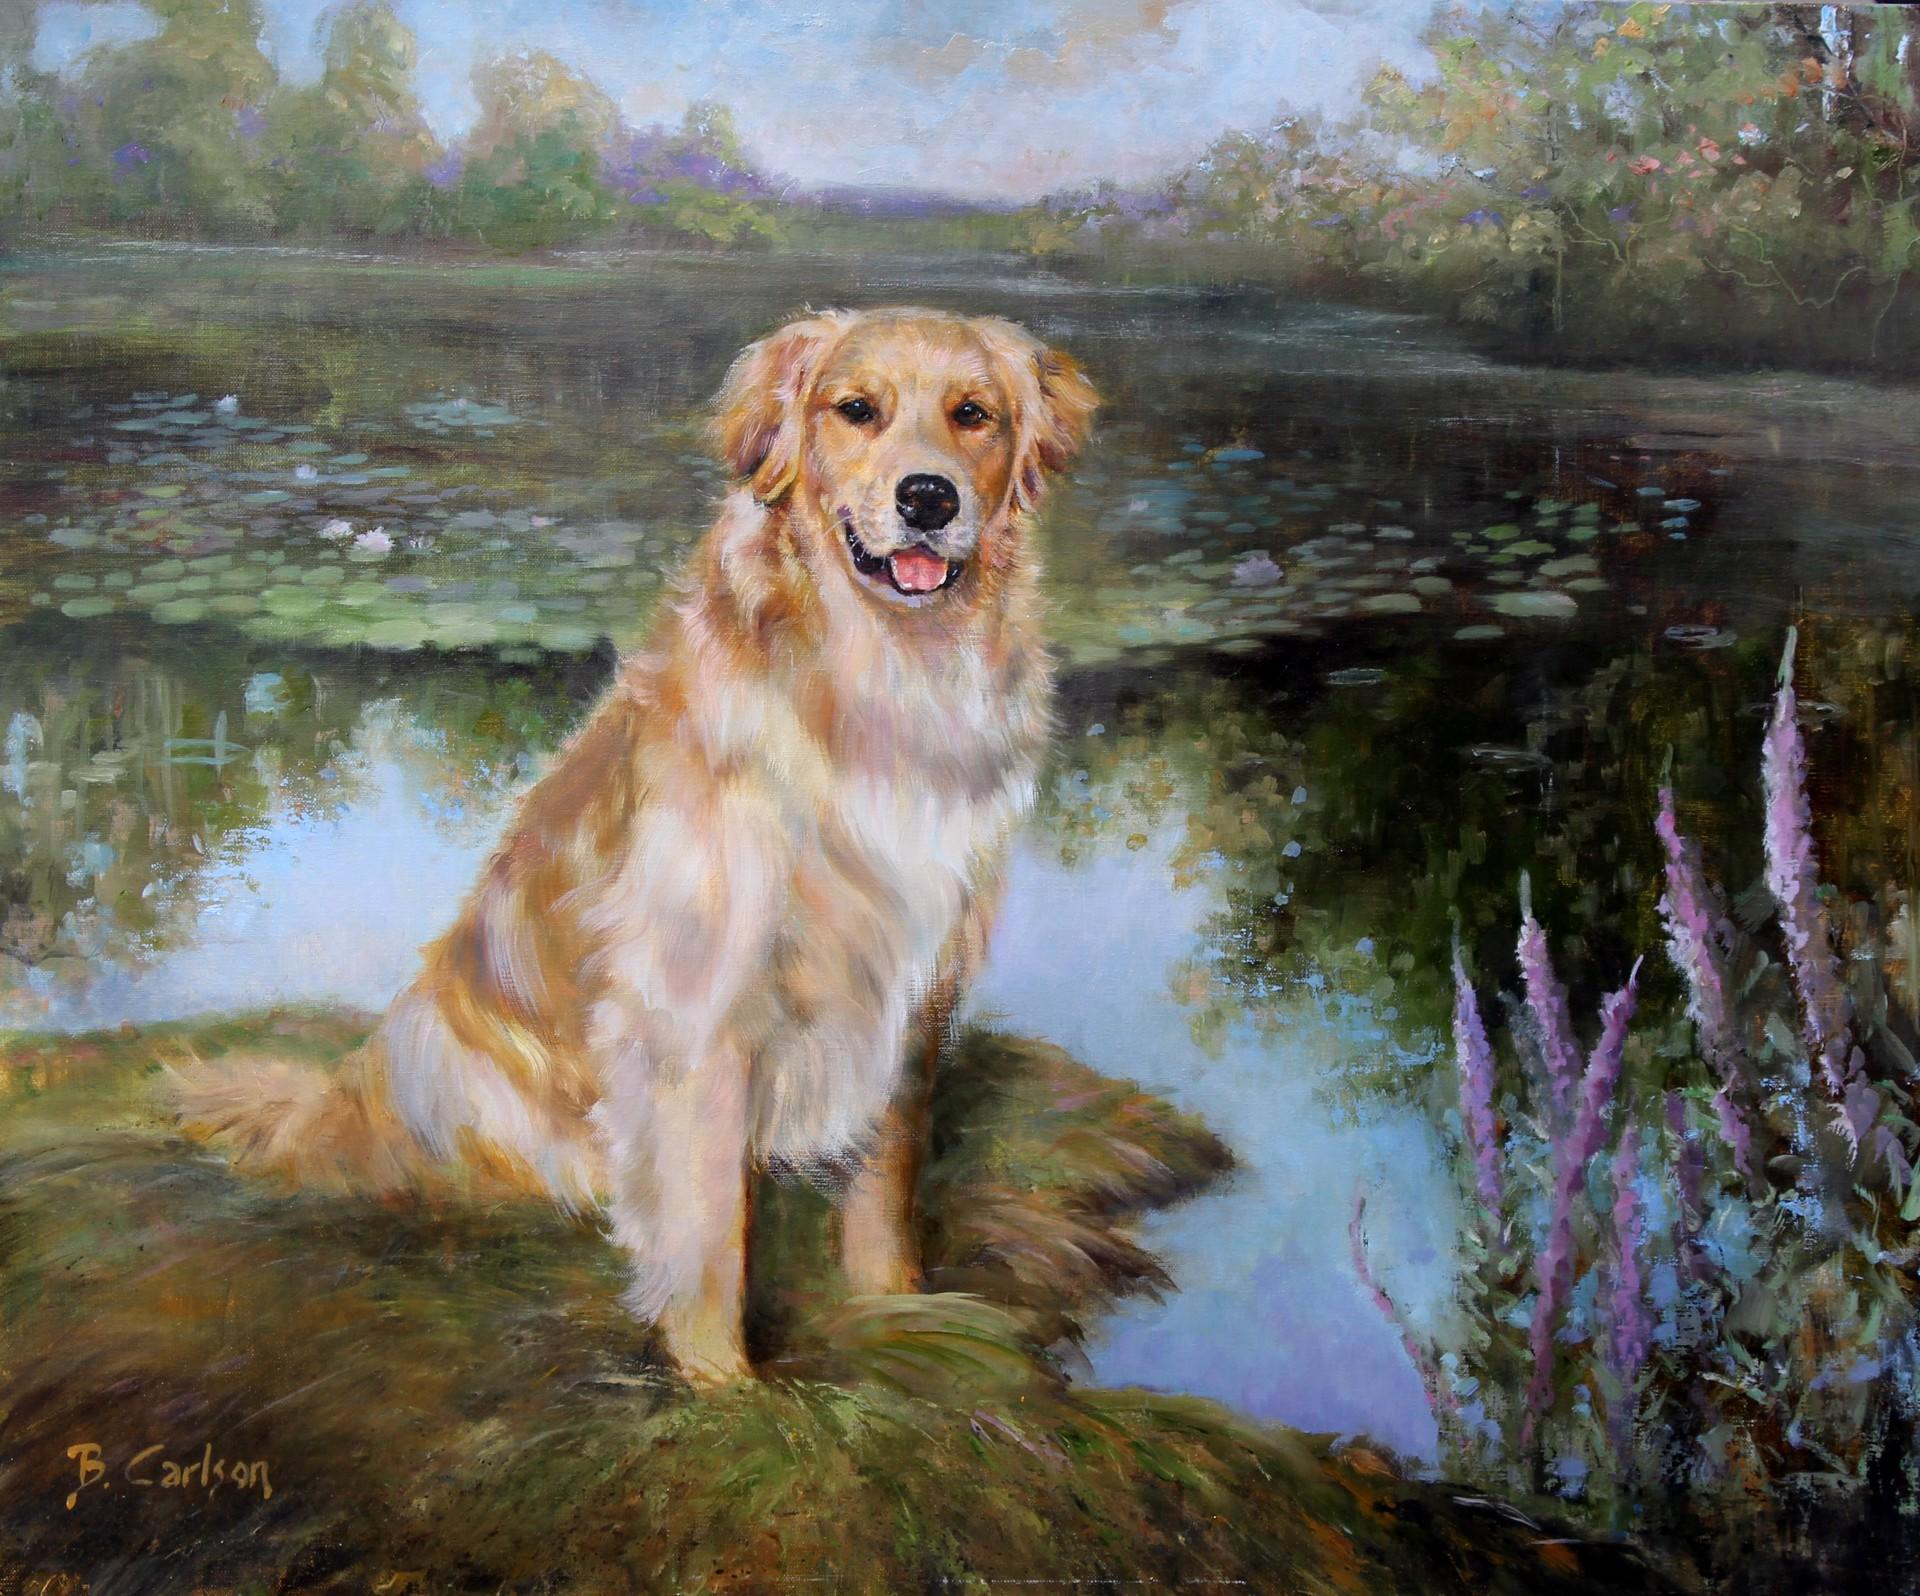 Beth Carlson Animal Painting - Dog Painting of a Beautifully Feathered Golden Retriever a in Country Landscape